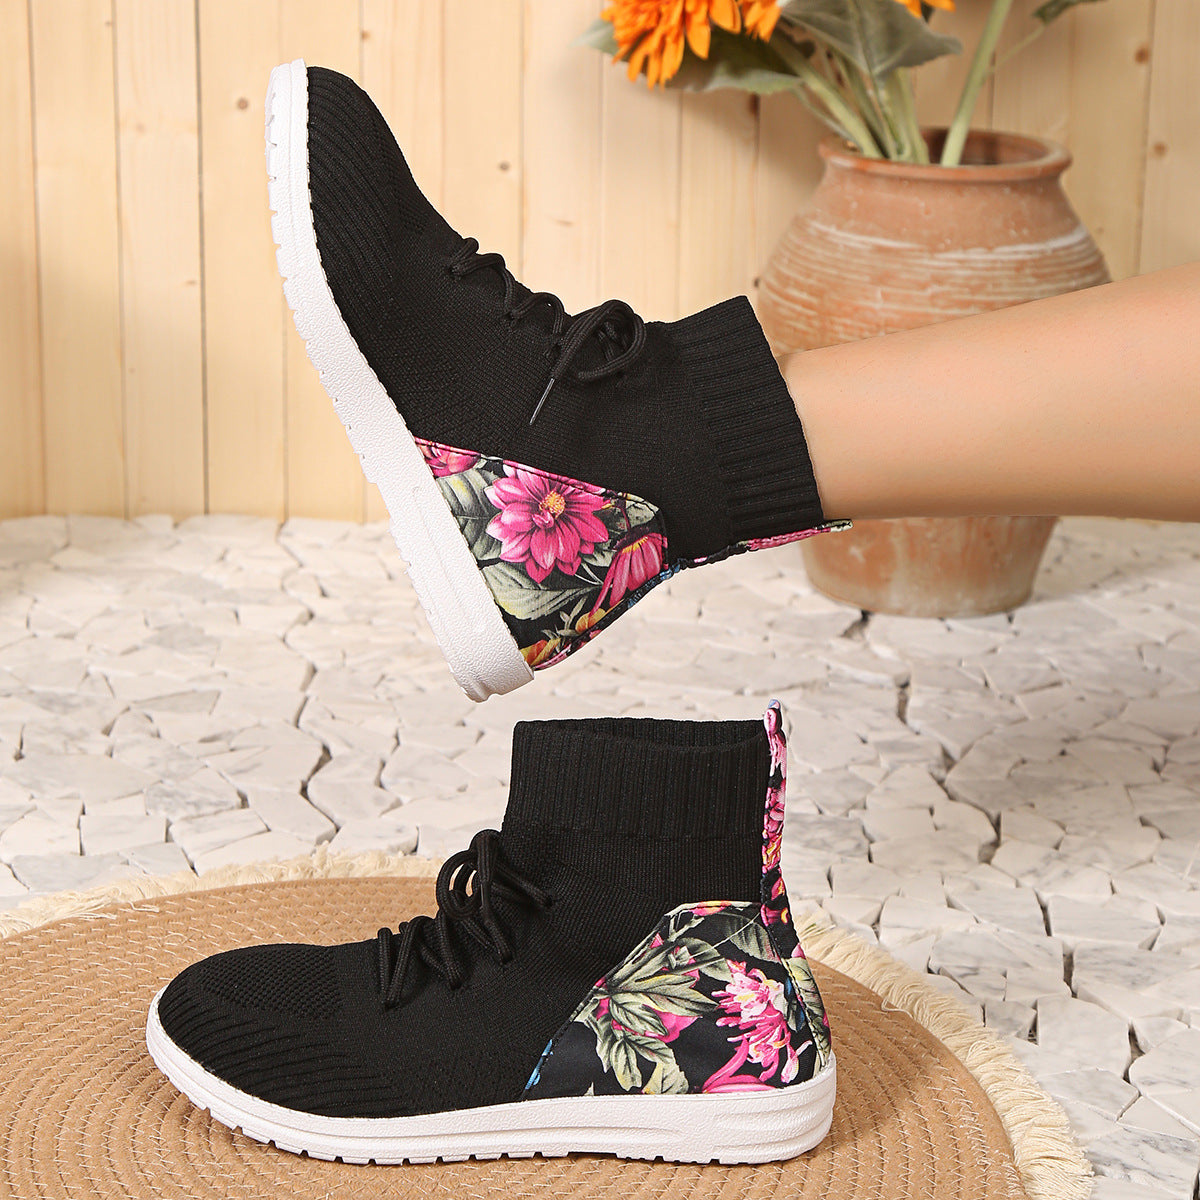 High-top round toe lace-up elastic sock boots